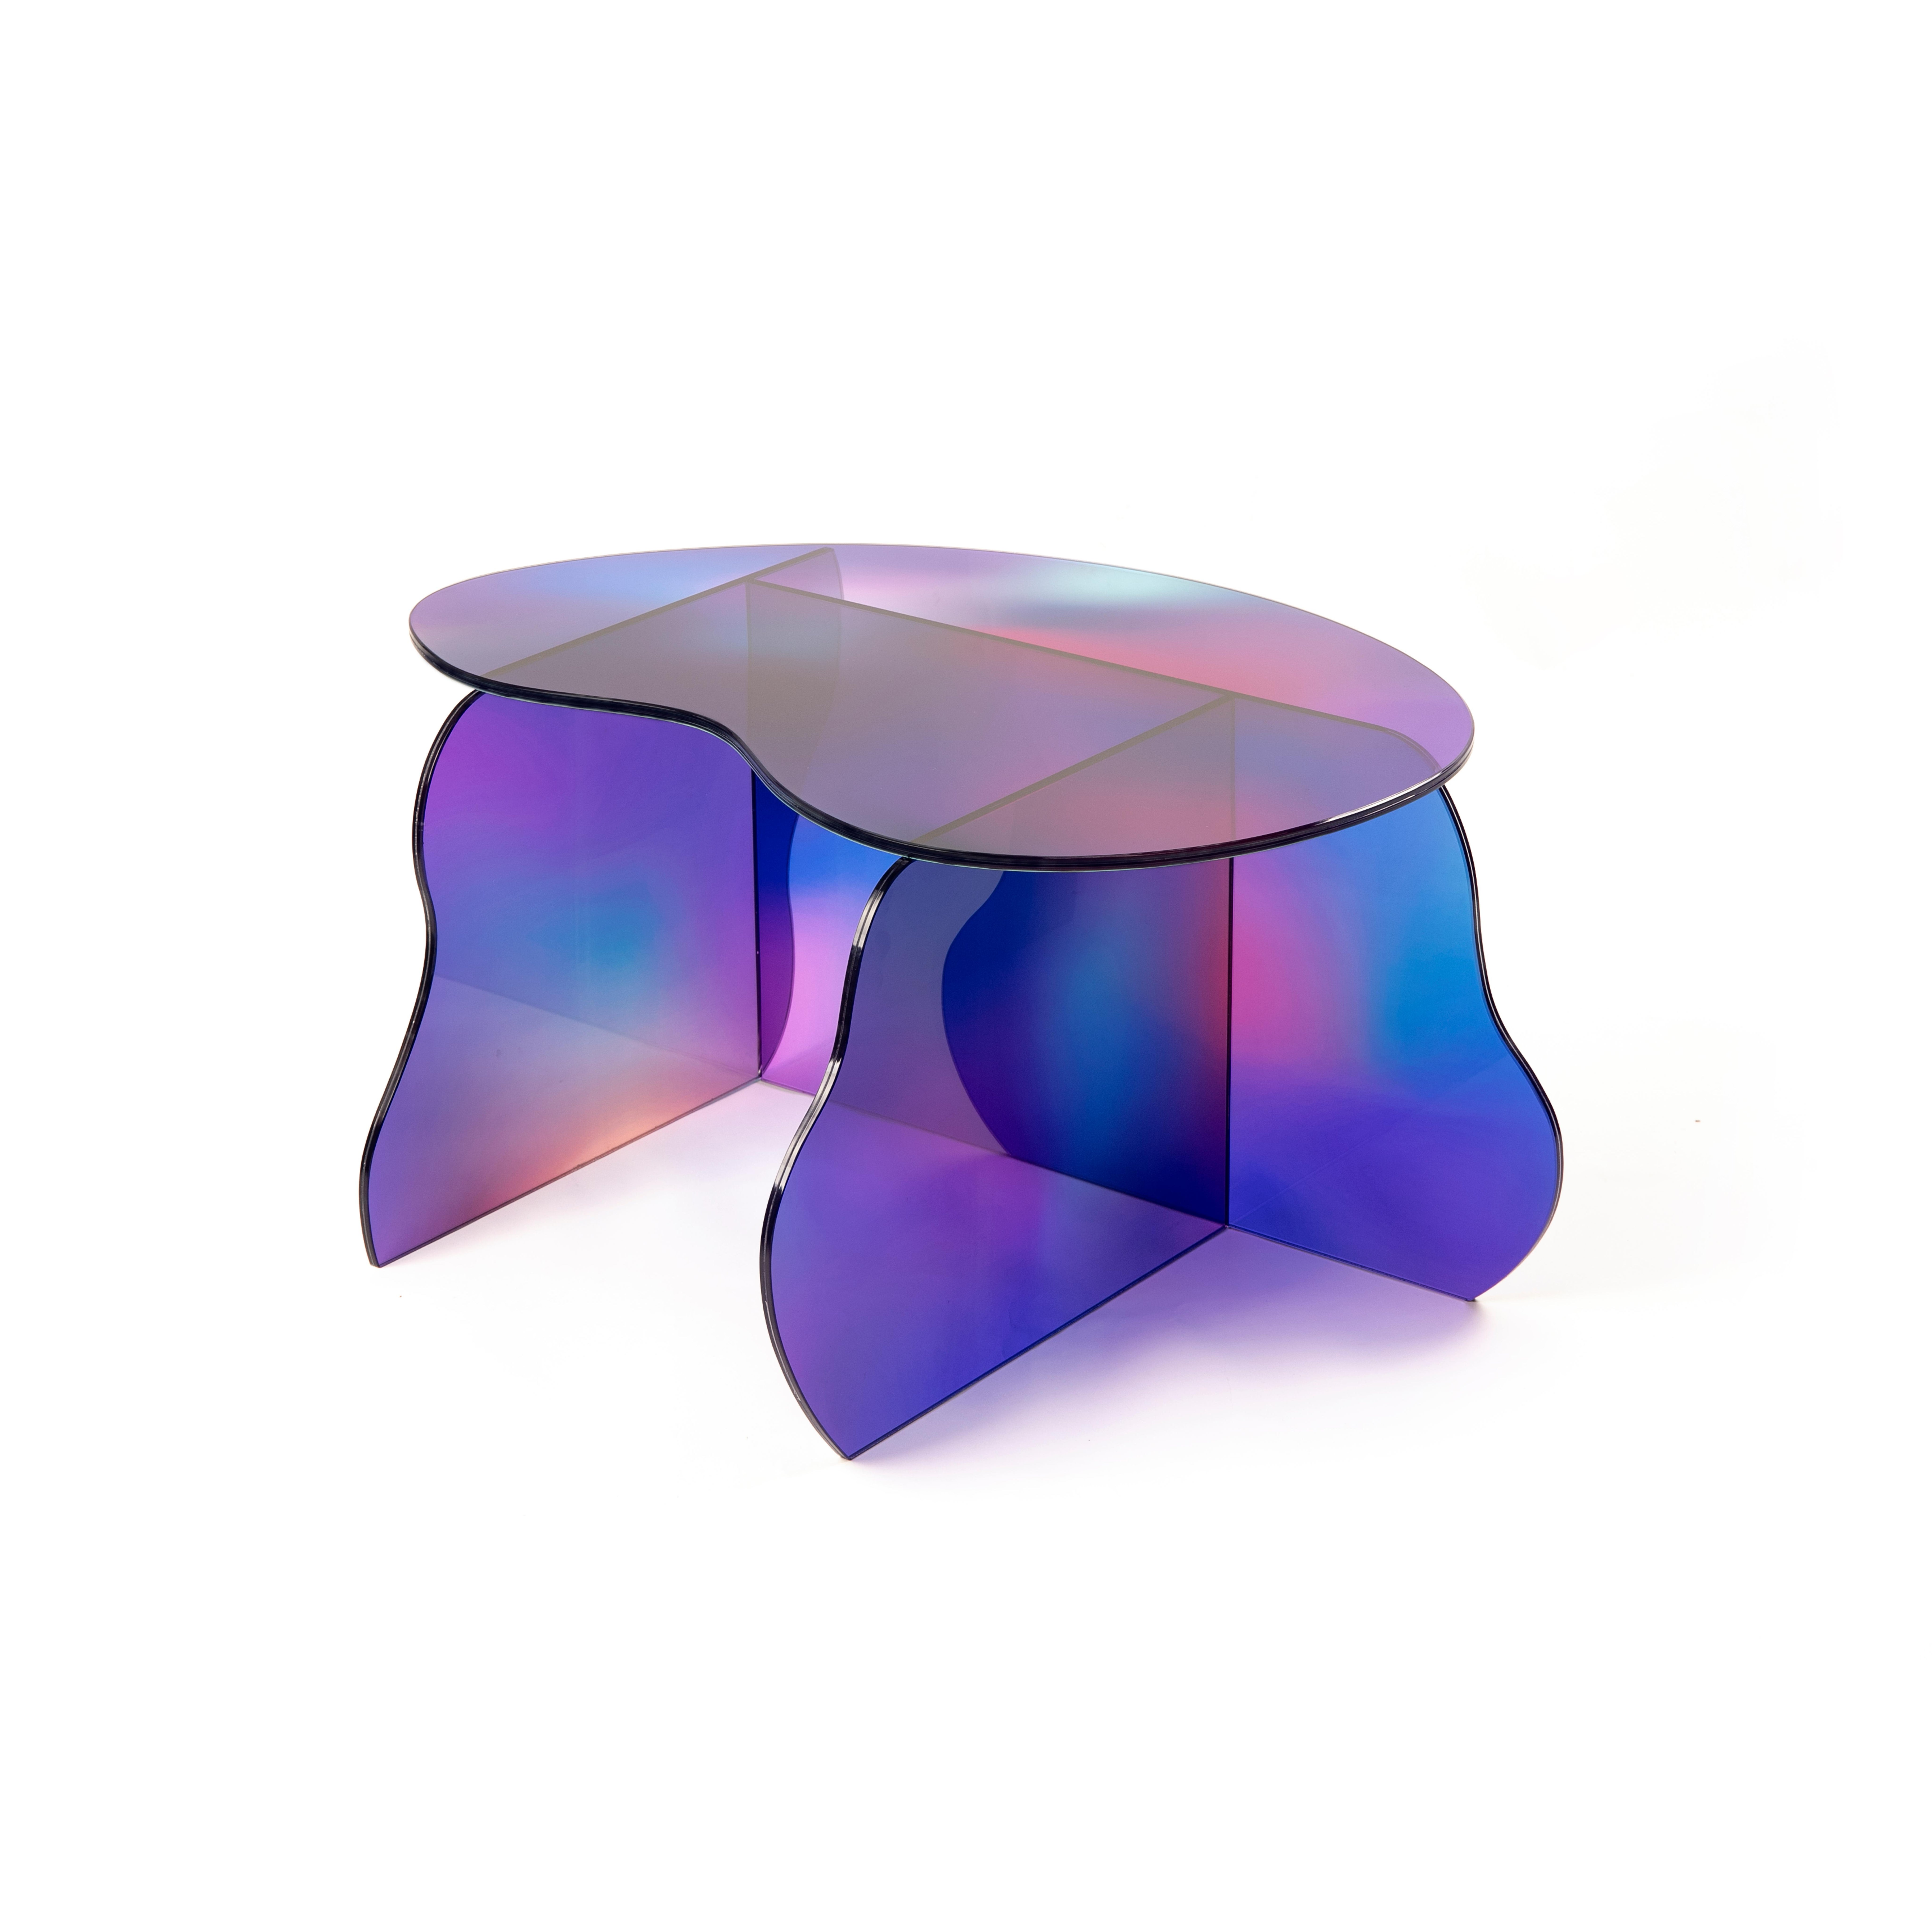 Dichroic glass table sculpted by Studio-Chacha
Dimensions: 85.5 x 69 x 40 cm
Materials: Glass, film

Studio-Chacha is a high-end art furniture studio founded in 2017 that creates a new aesthetic with an unfamiliar combination of familiar